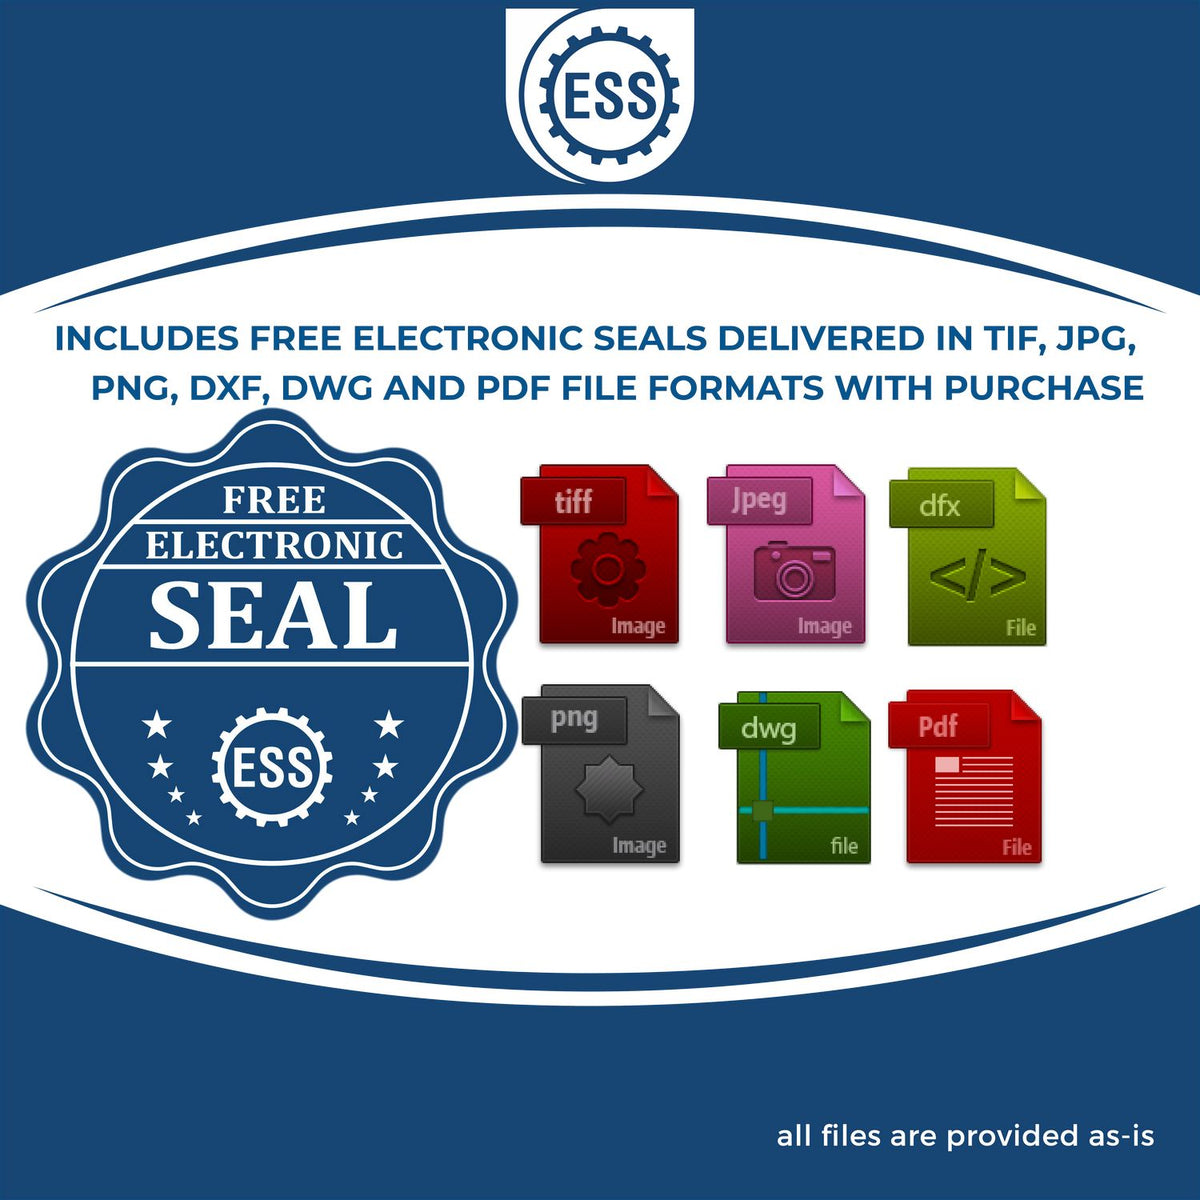 An infographic for the free electronic seal for the State of Arizona Extended Long Reach Geologist Seal illustrating the different file type icons such as DXF, DWG, TIF, JPG and PNG.